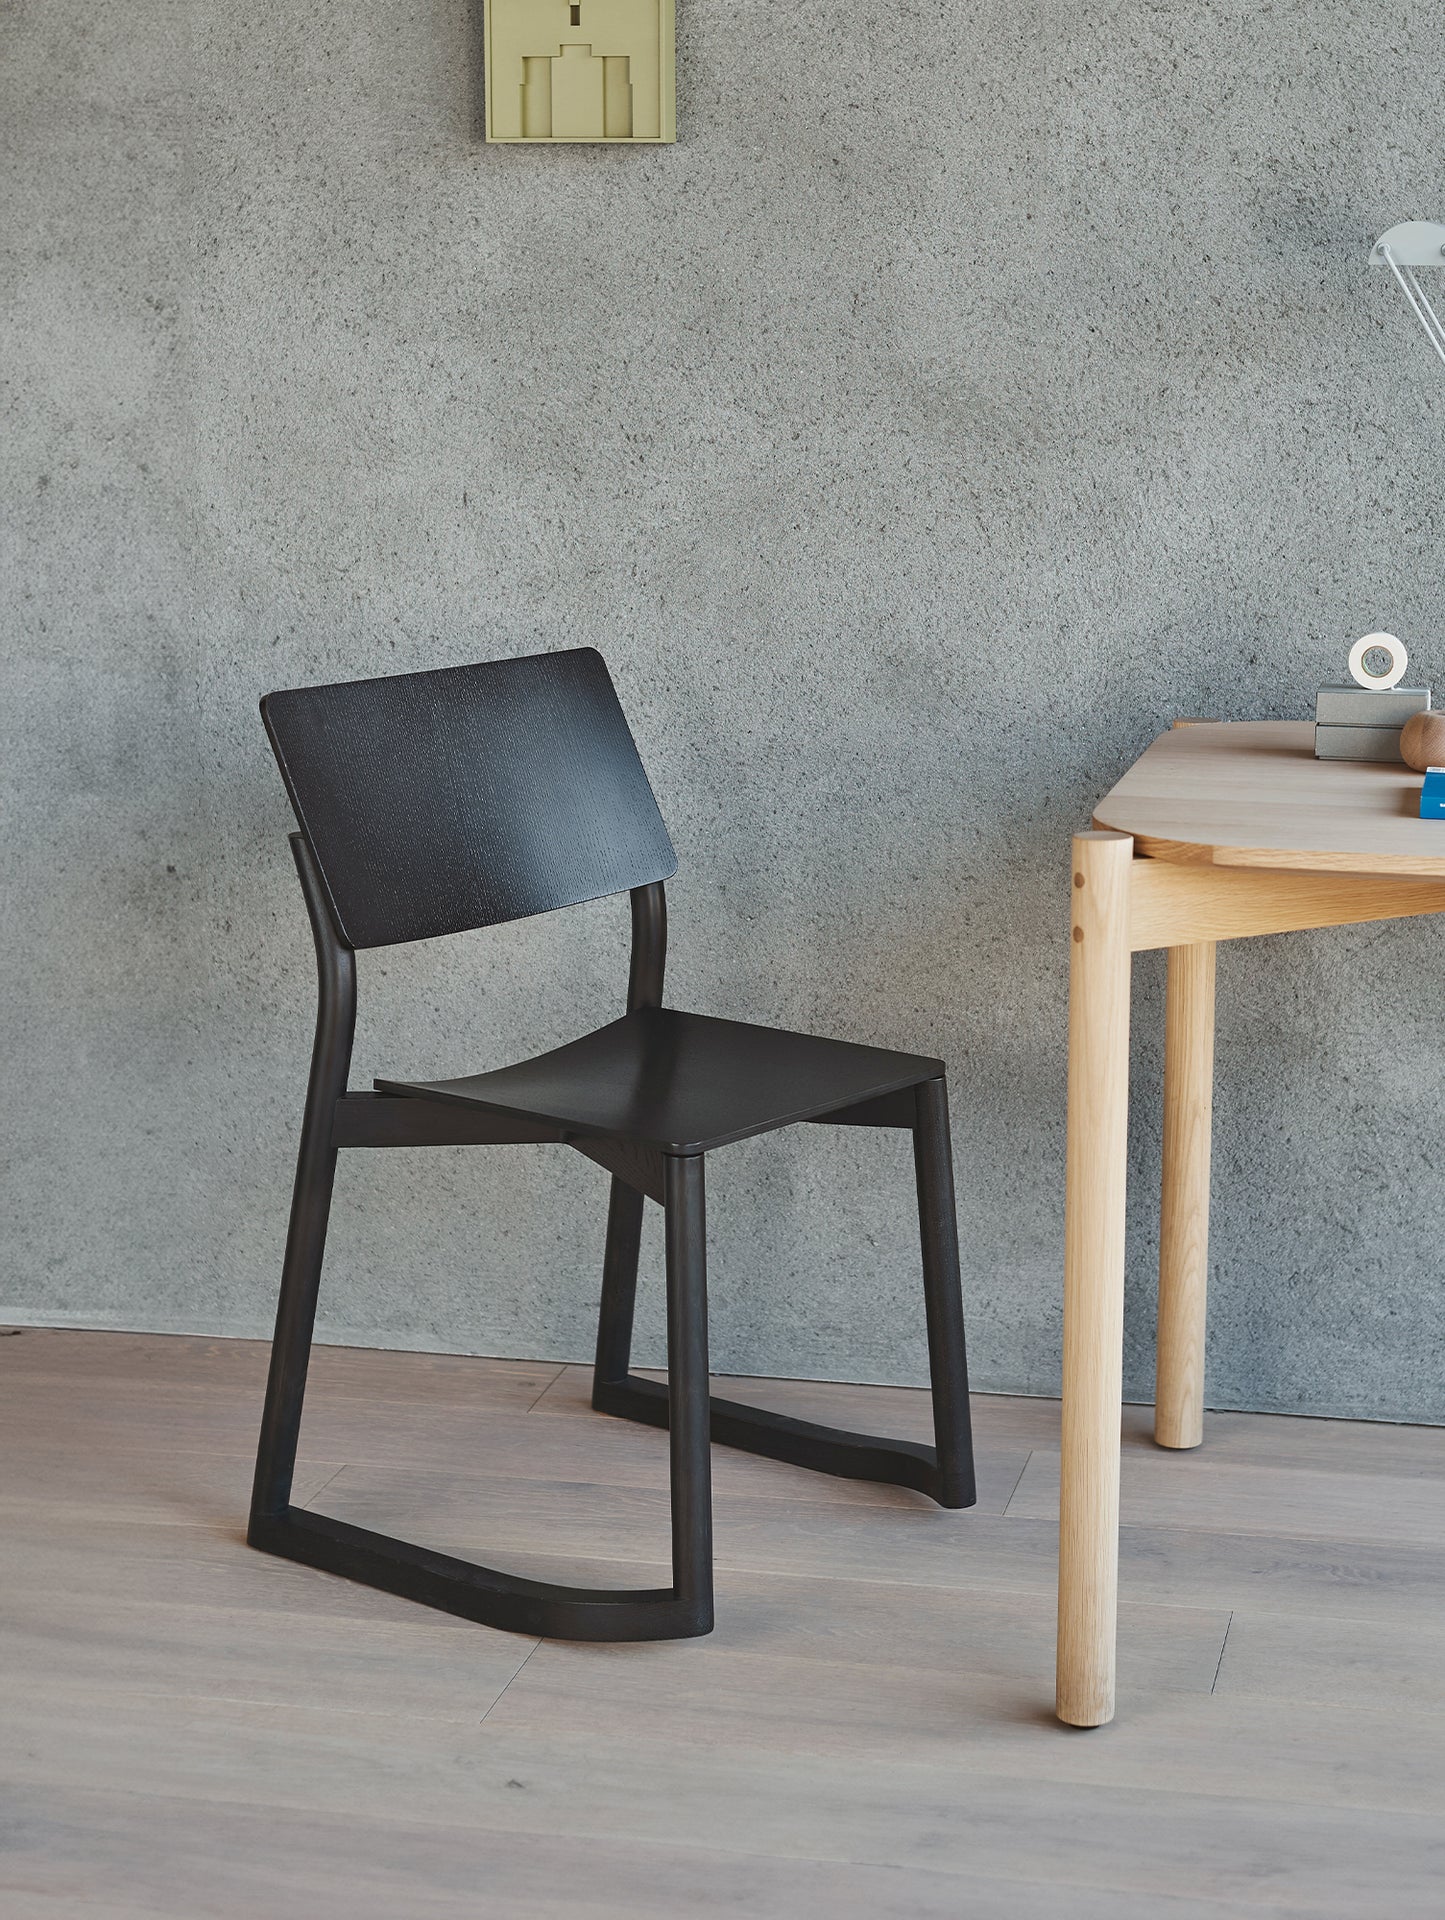 Panorama Chair with Runners by Karimoku New Standard - Matte Black Lacquered Oak